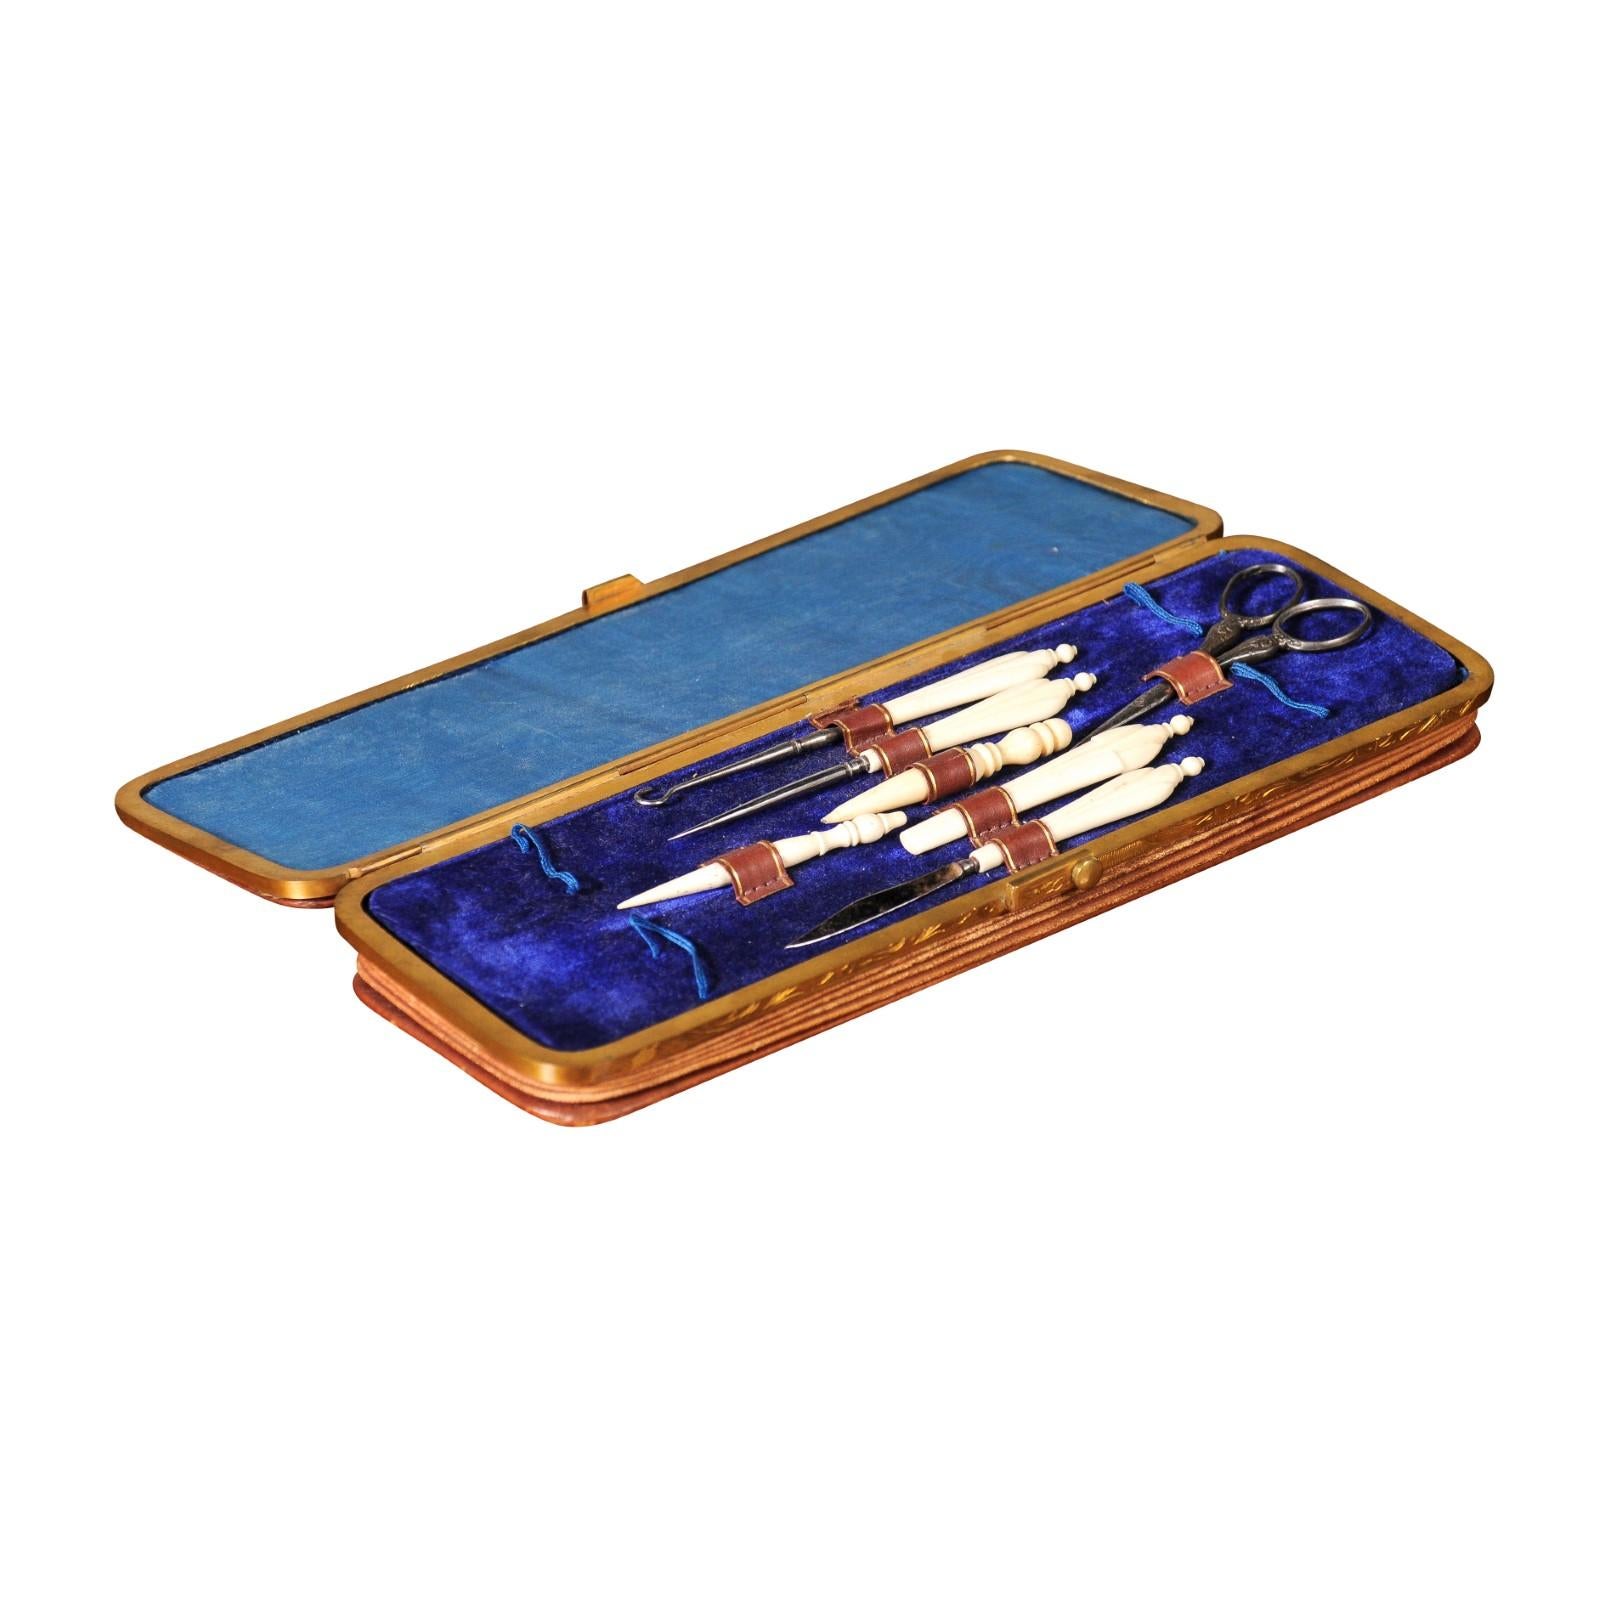 French 1850s Napoléon III period leather case sewing kit with bronze hardware and blue velvet interior. Take a step back into the lavish world of the mid-19th century with this French Napoleon III period sewing kit. This exquisite sewing kit exudes